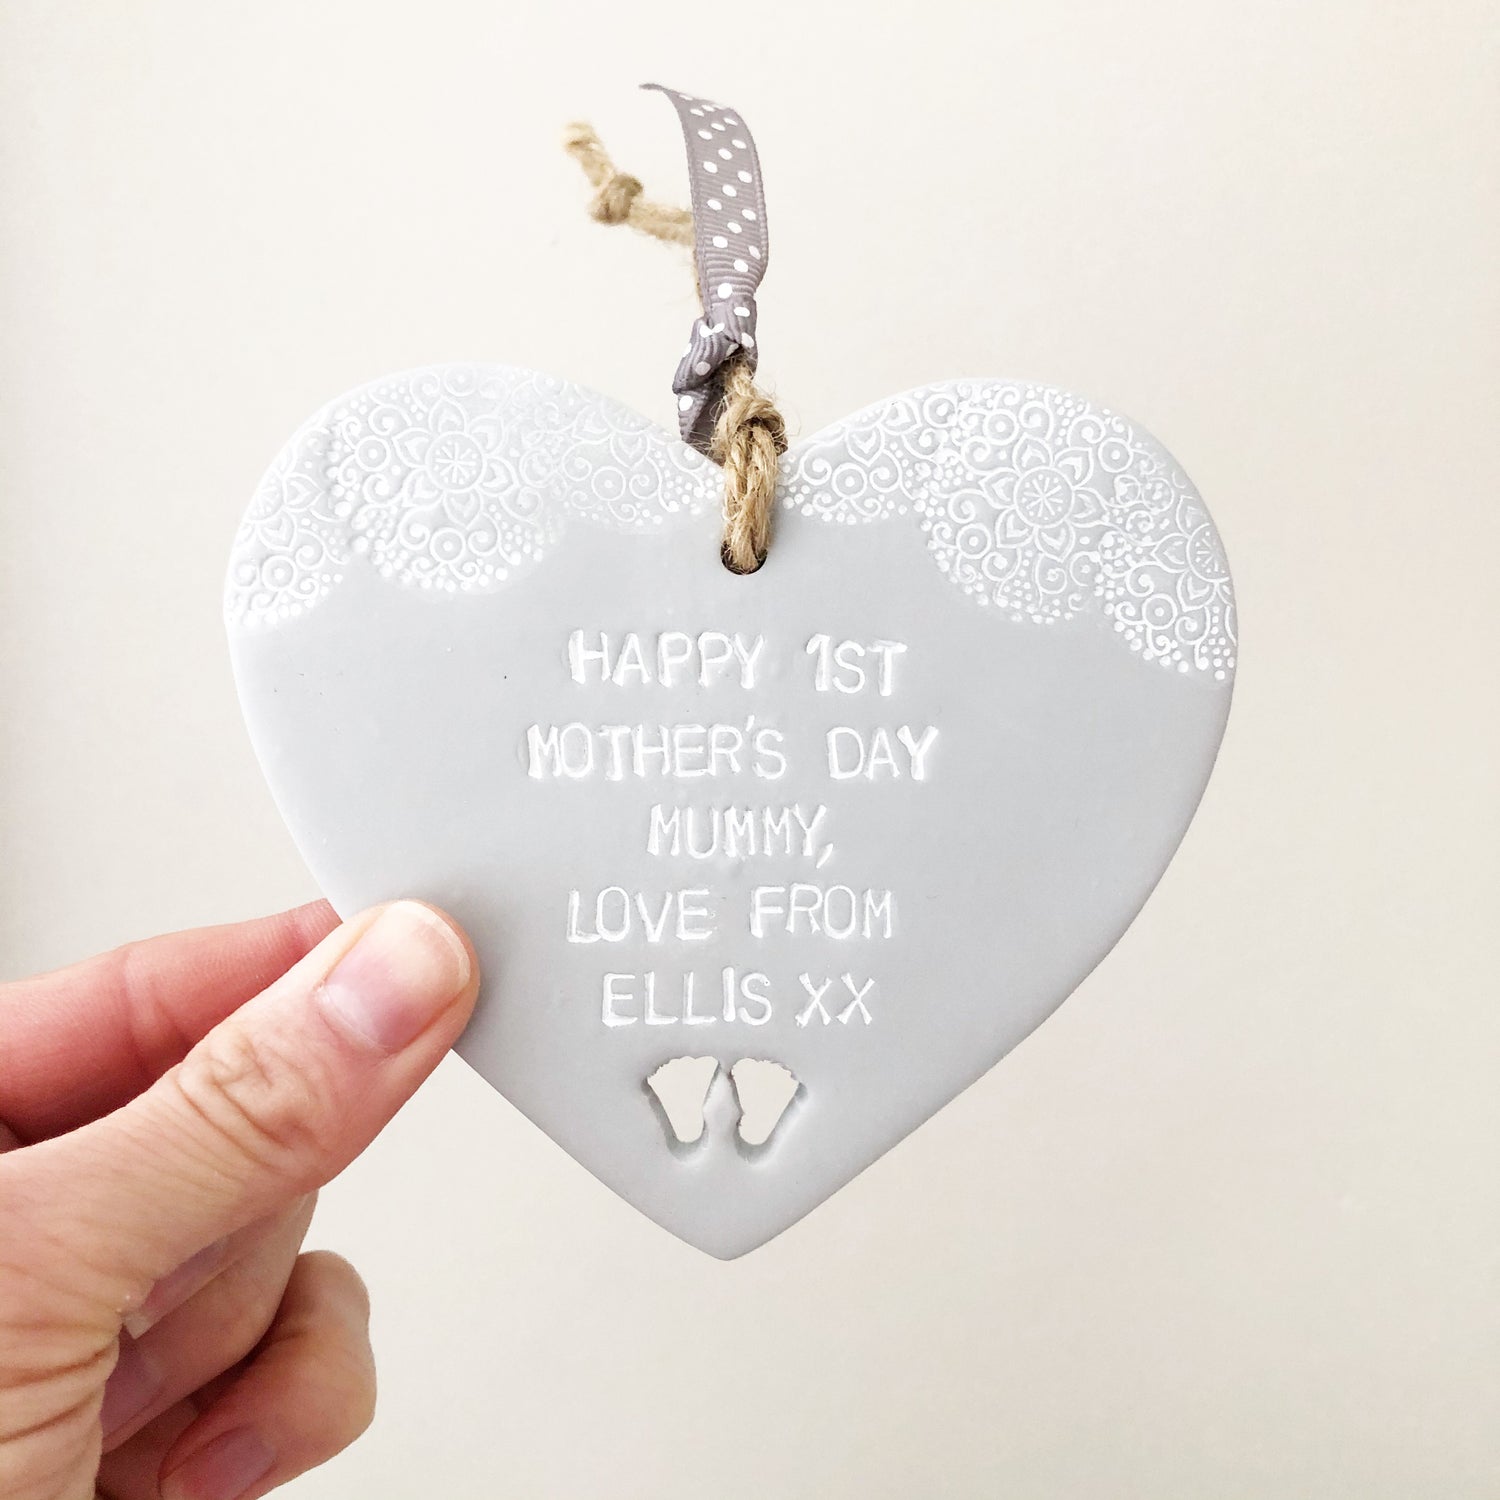 Personalised first Mother’s Day heart gift in grey clay personalised with Happy 1st Mother’s Day Mummy, love from Ellis xx with a white lace edge top